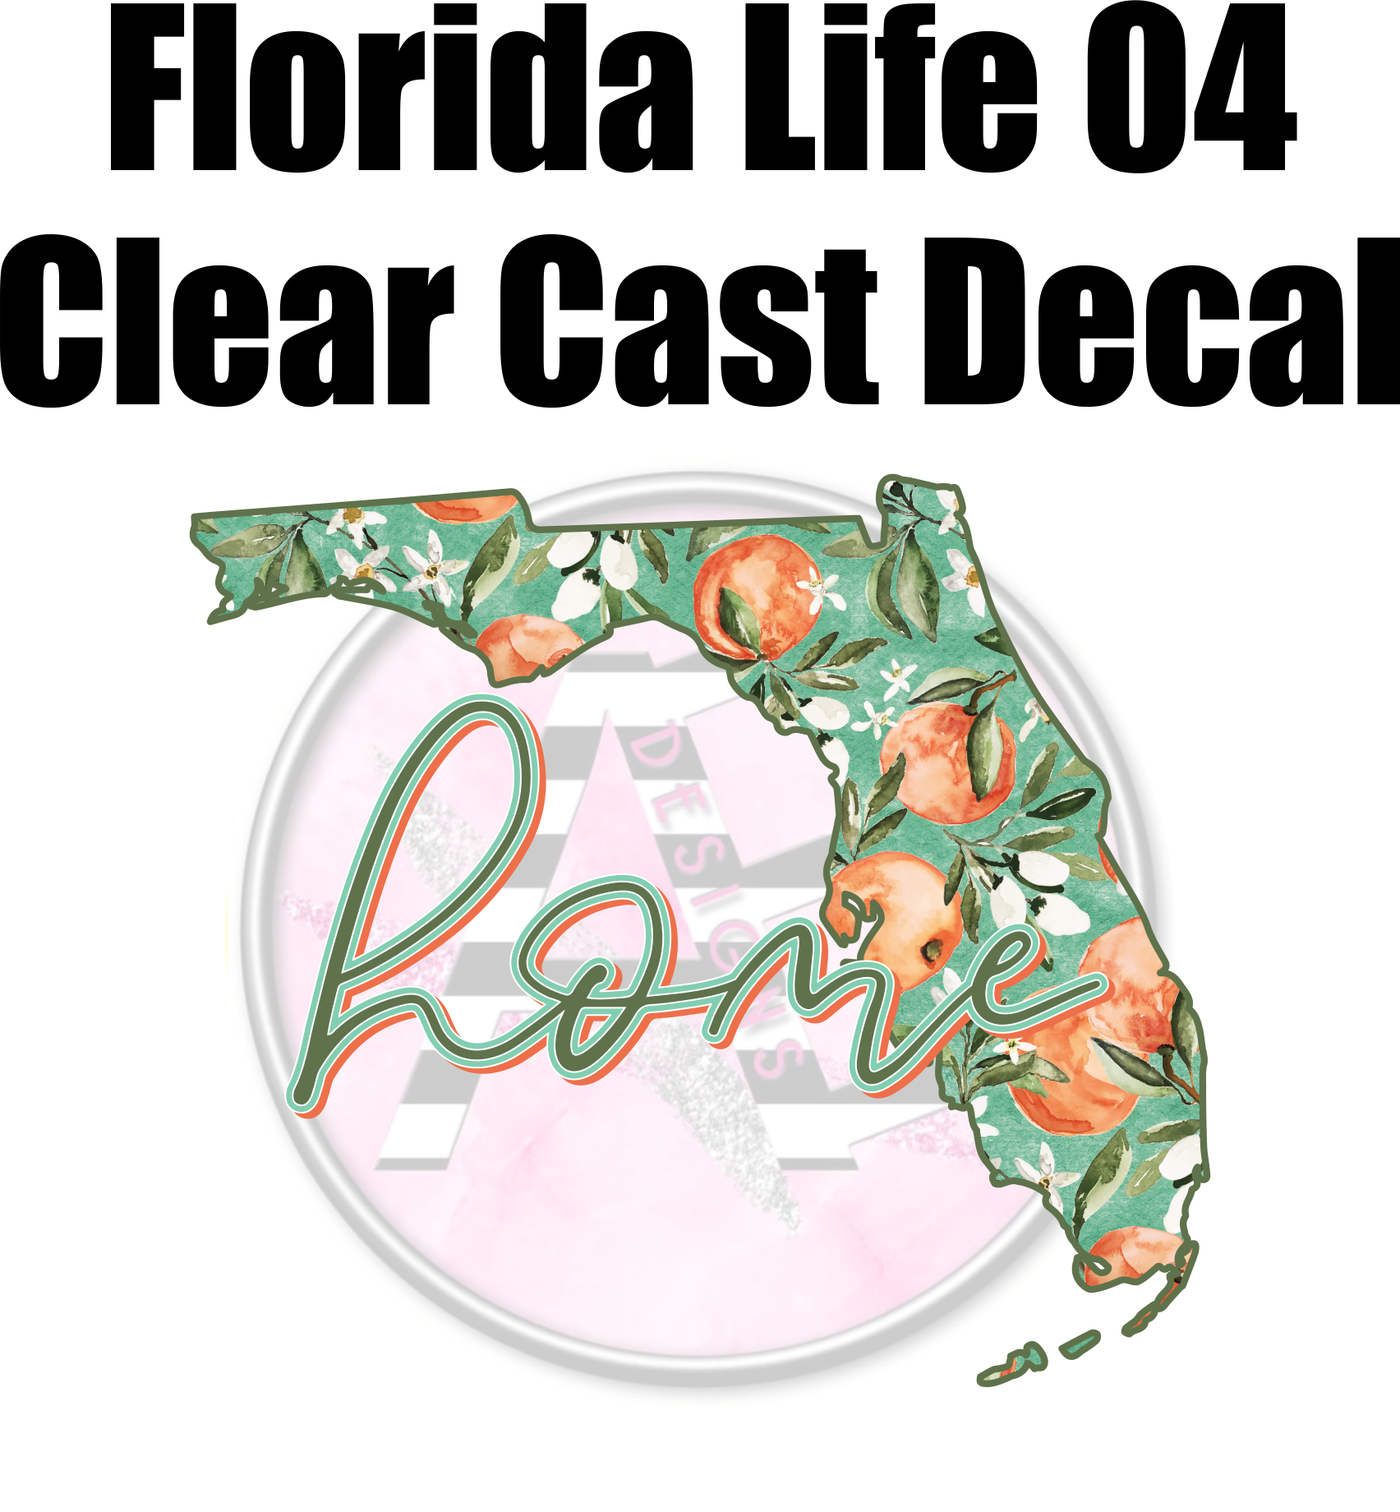 Florida Life 04 - Clear Cast Decal